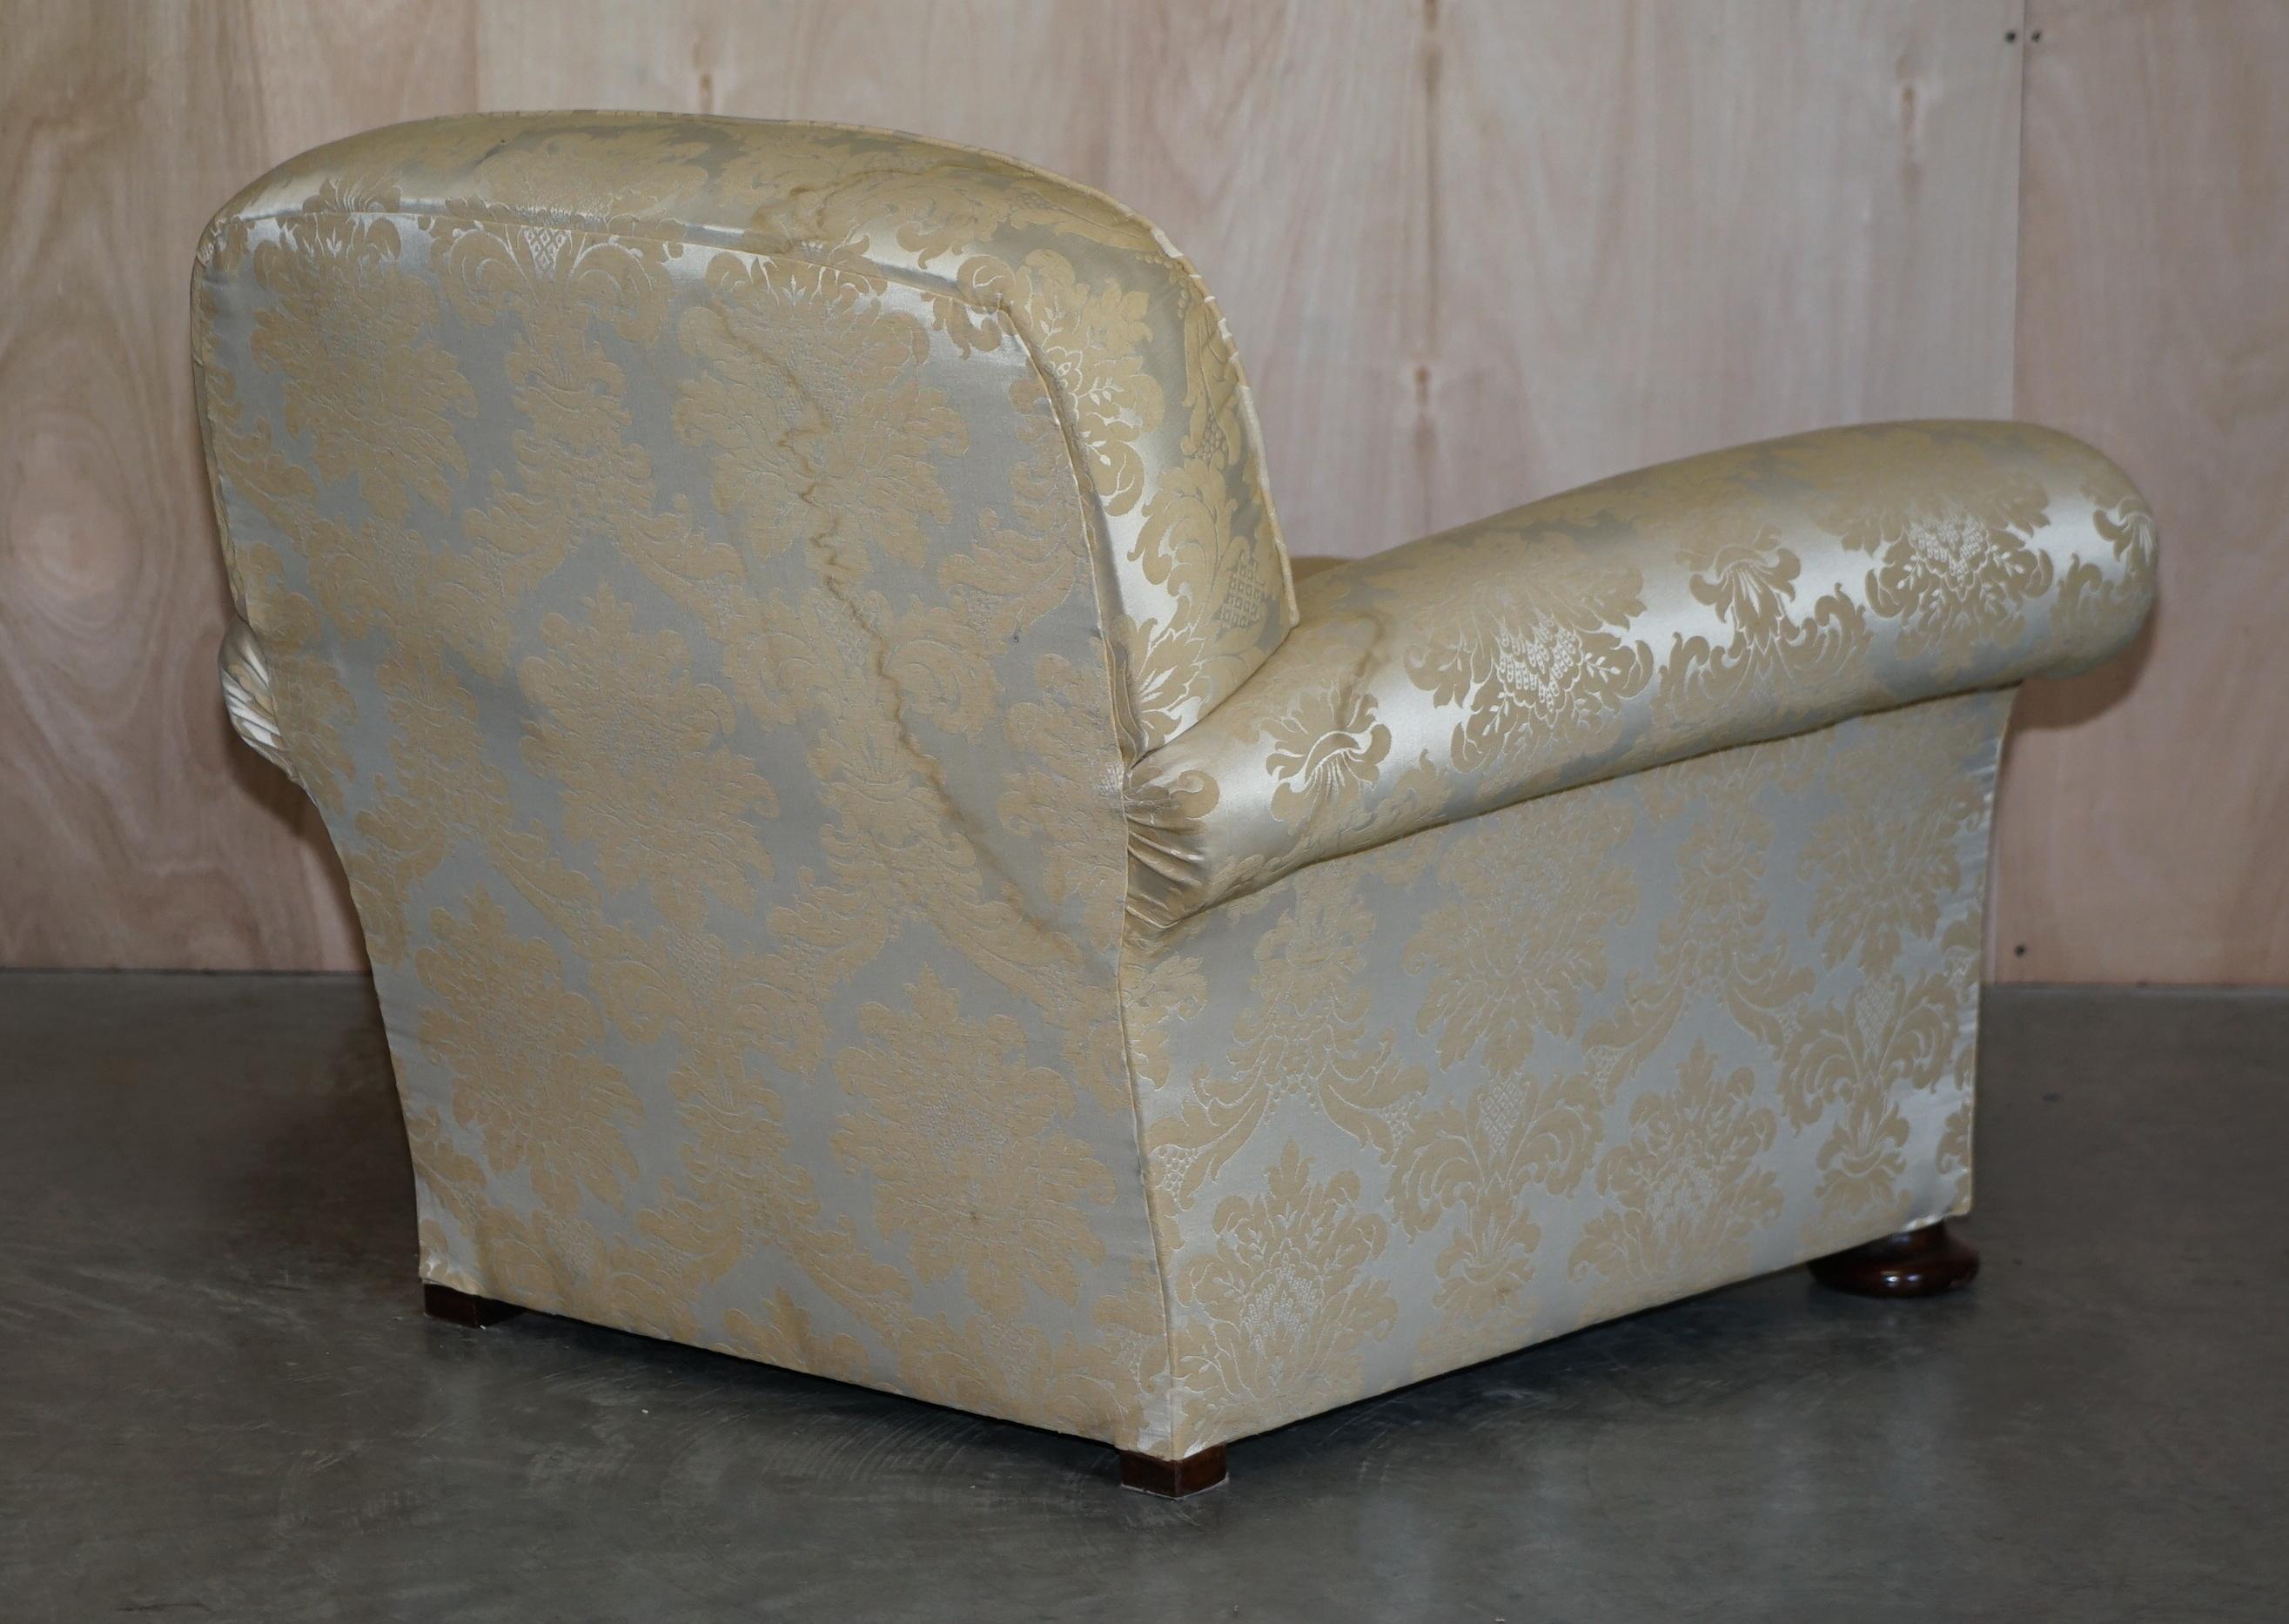 Hardwood Antique Victorian Sofa & Armchair Club Suite Damask Upholstery Turned Bun Feet For Sale